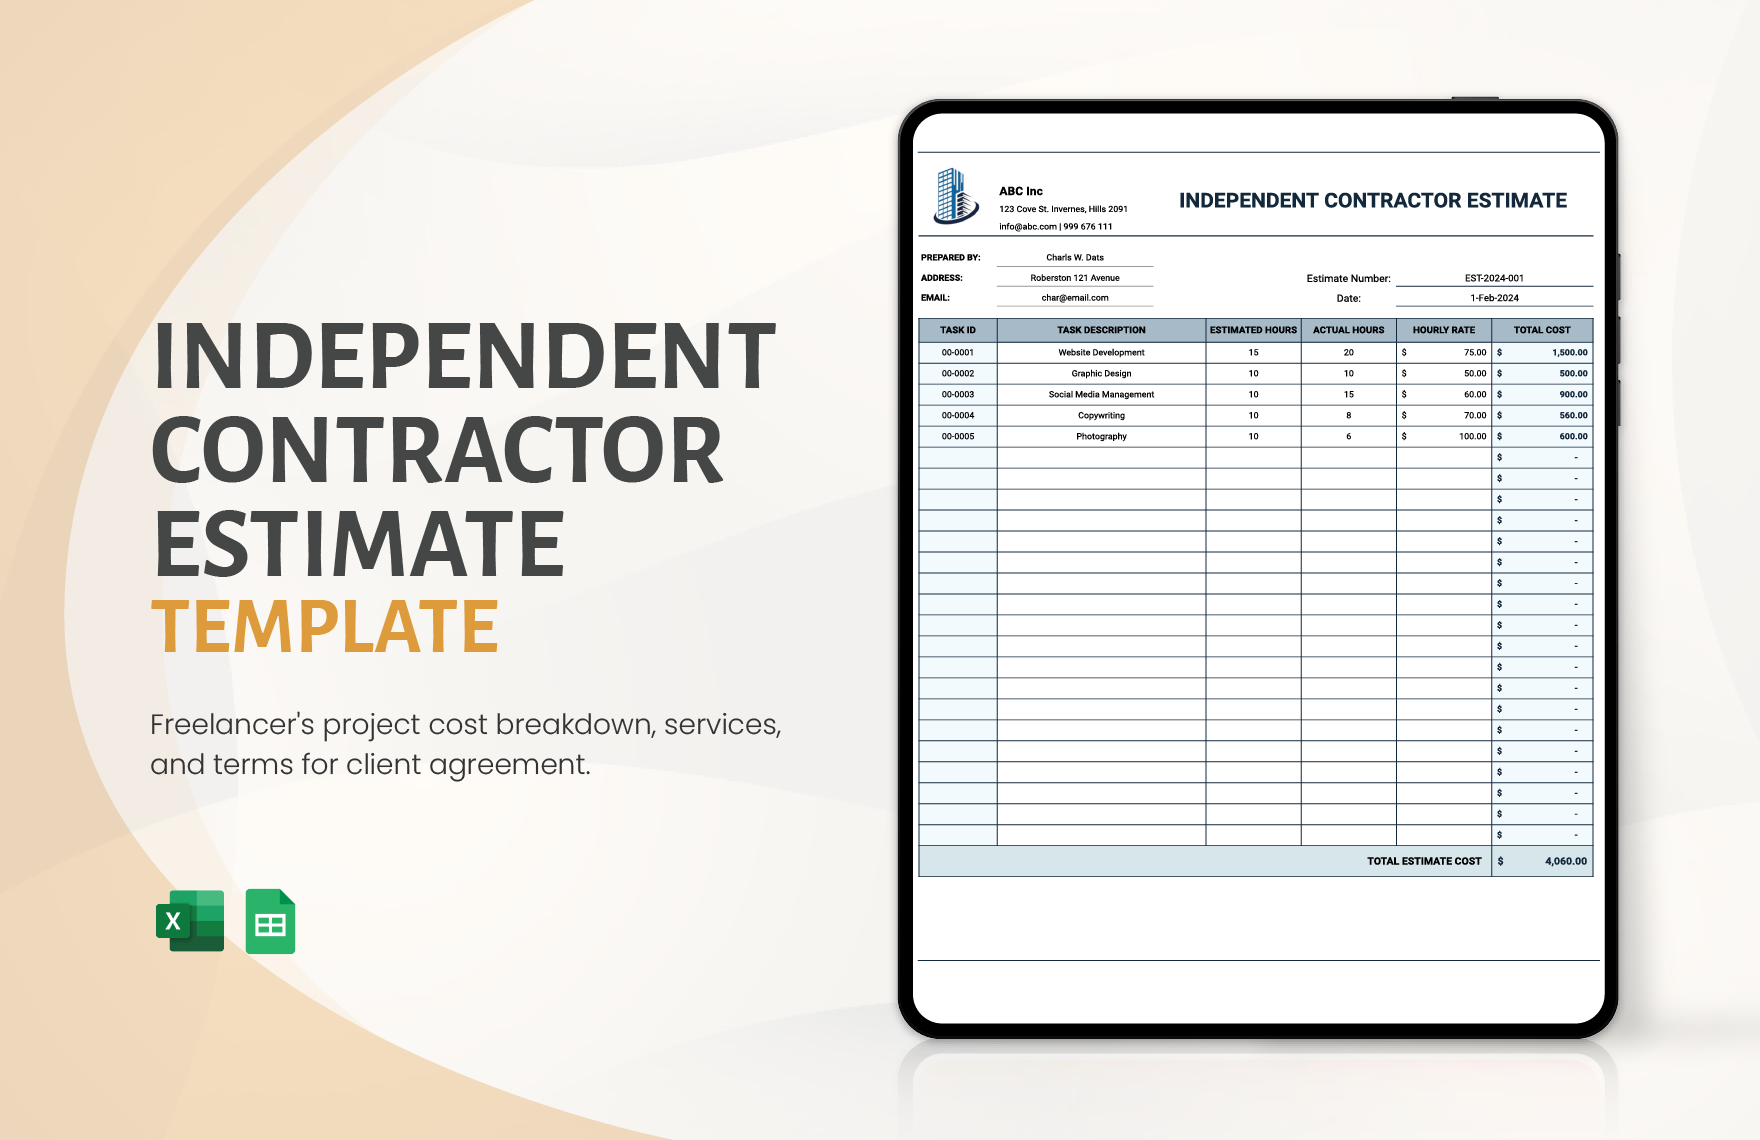 Independent Contractor Estimate Template